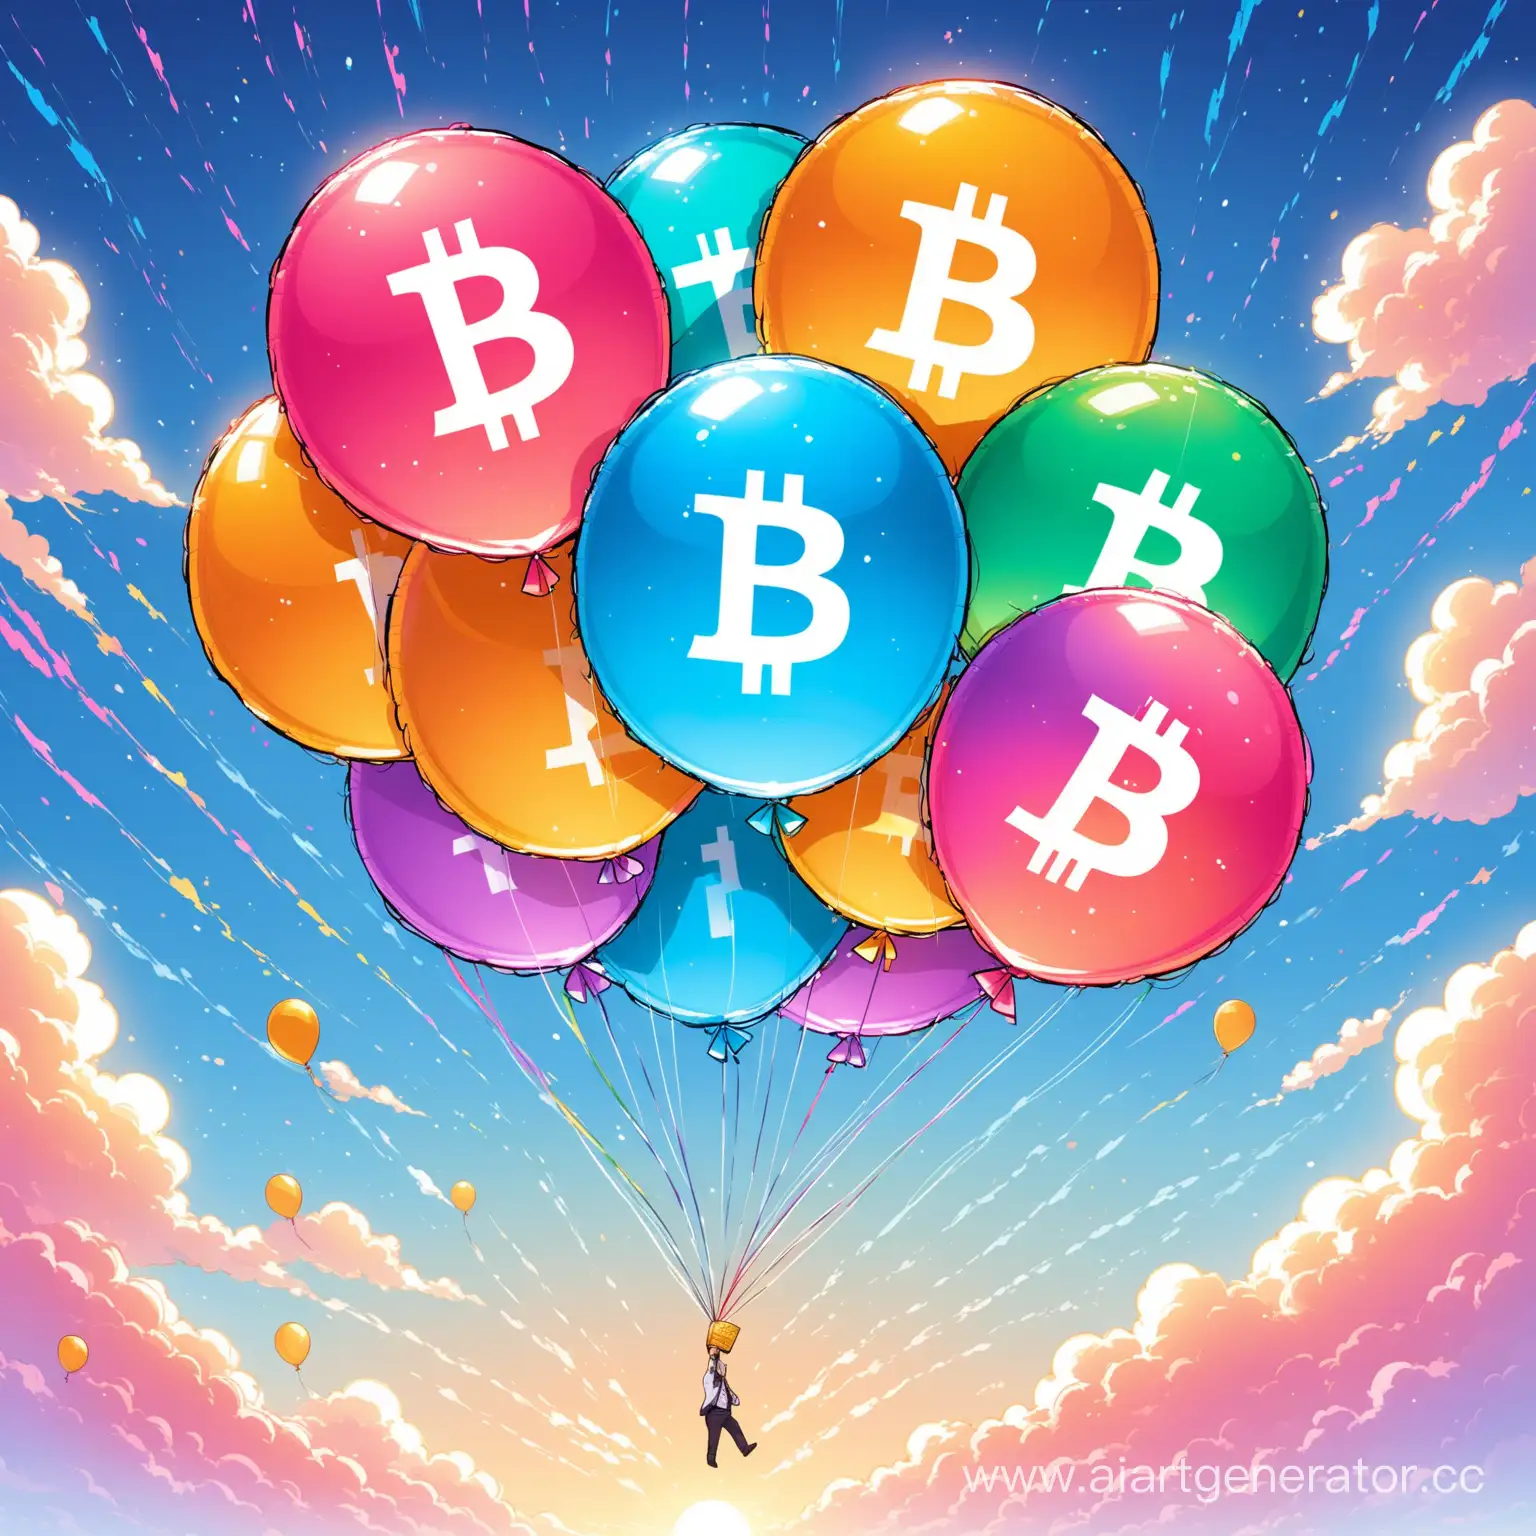 Vibrant-Bitcoin-Themed-Party-with-Balloons-and-Decorations